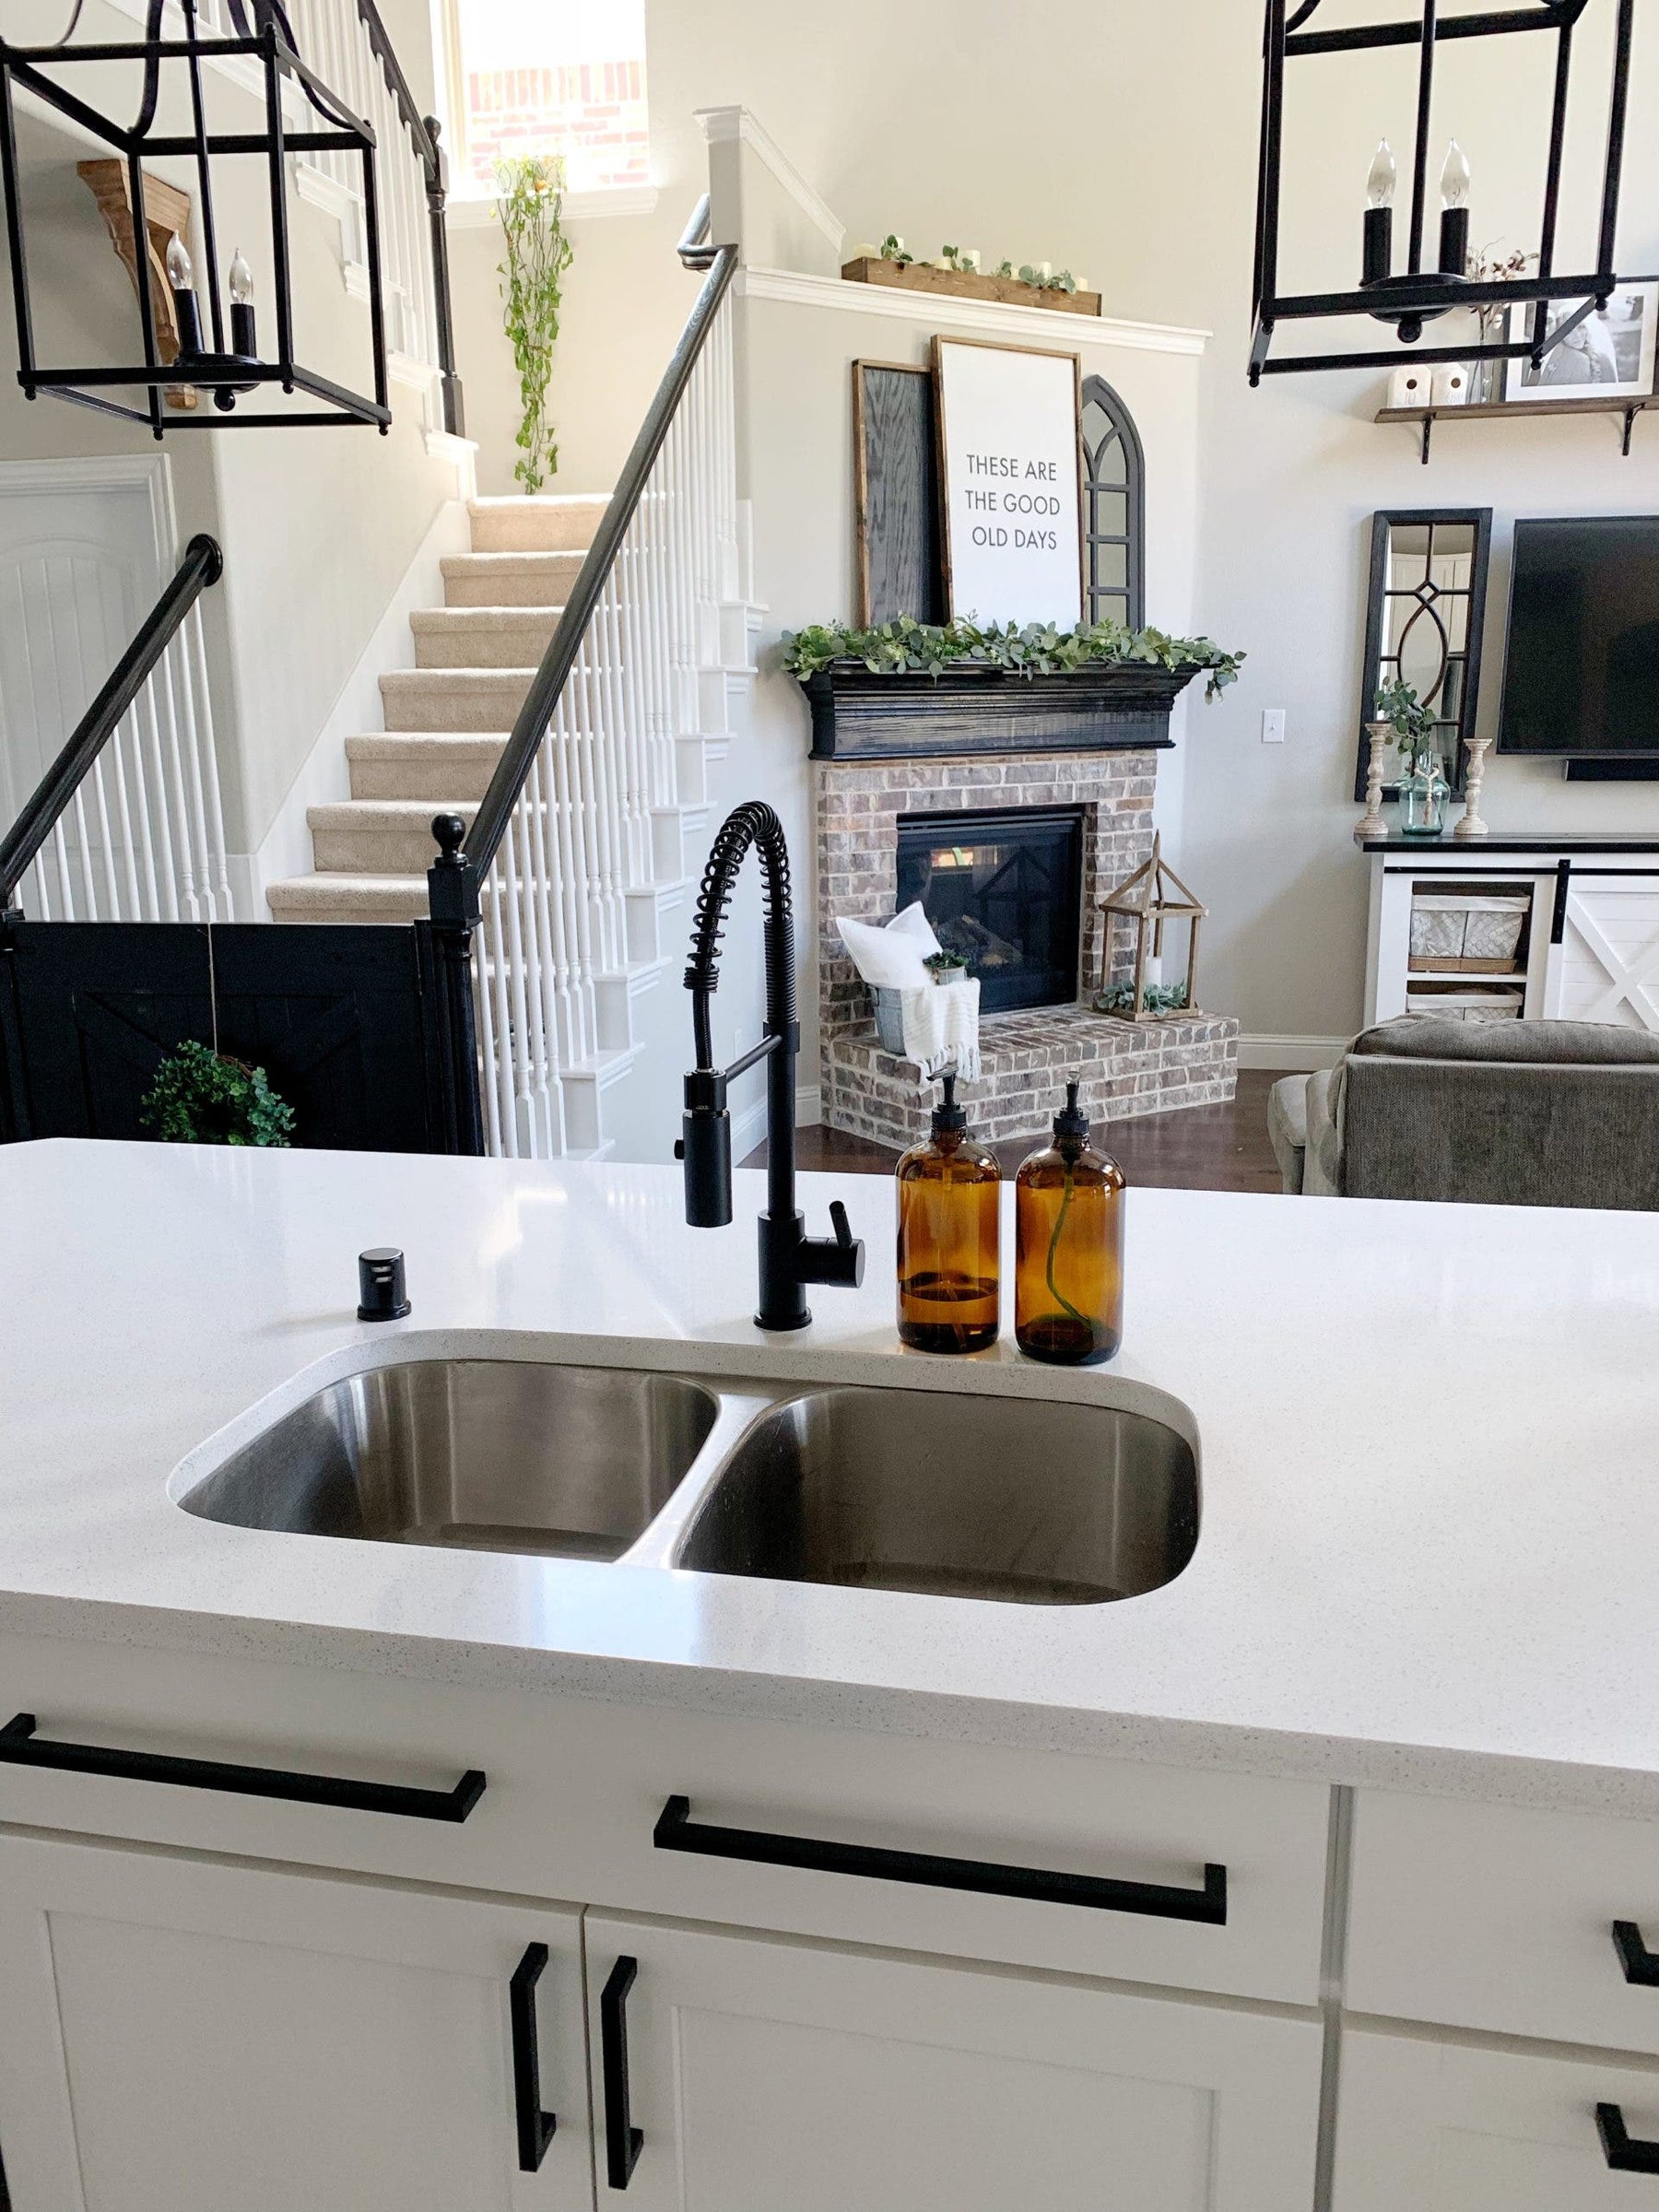 Benefits of a Pre-Rinse Kitchen Faucet